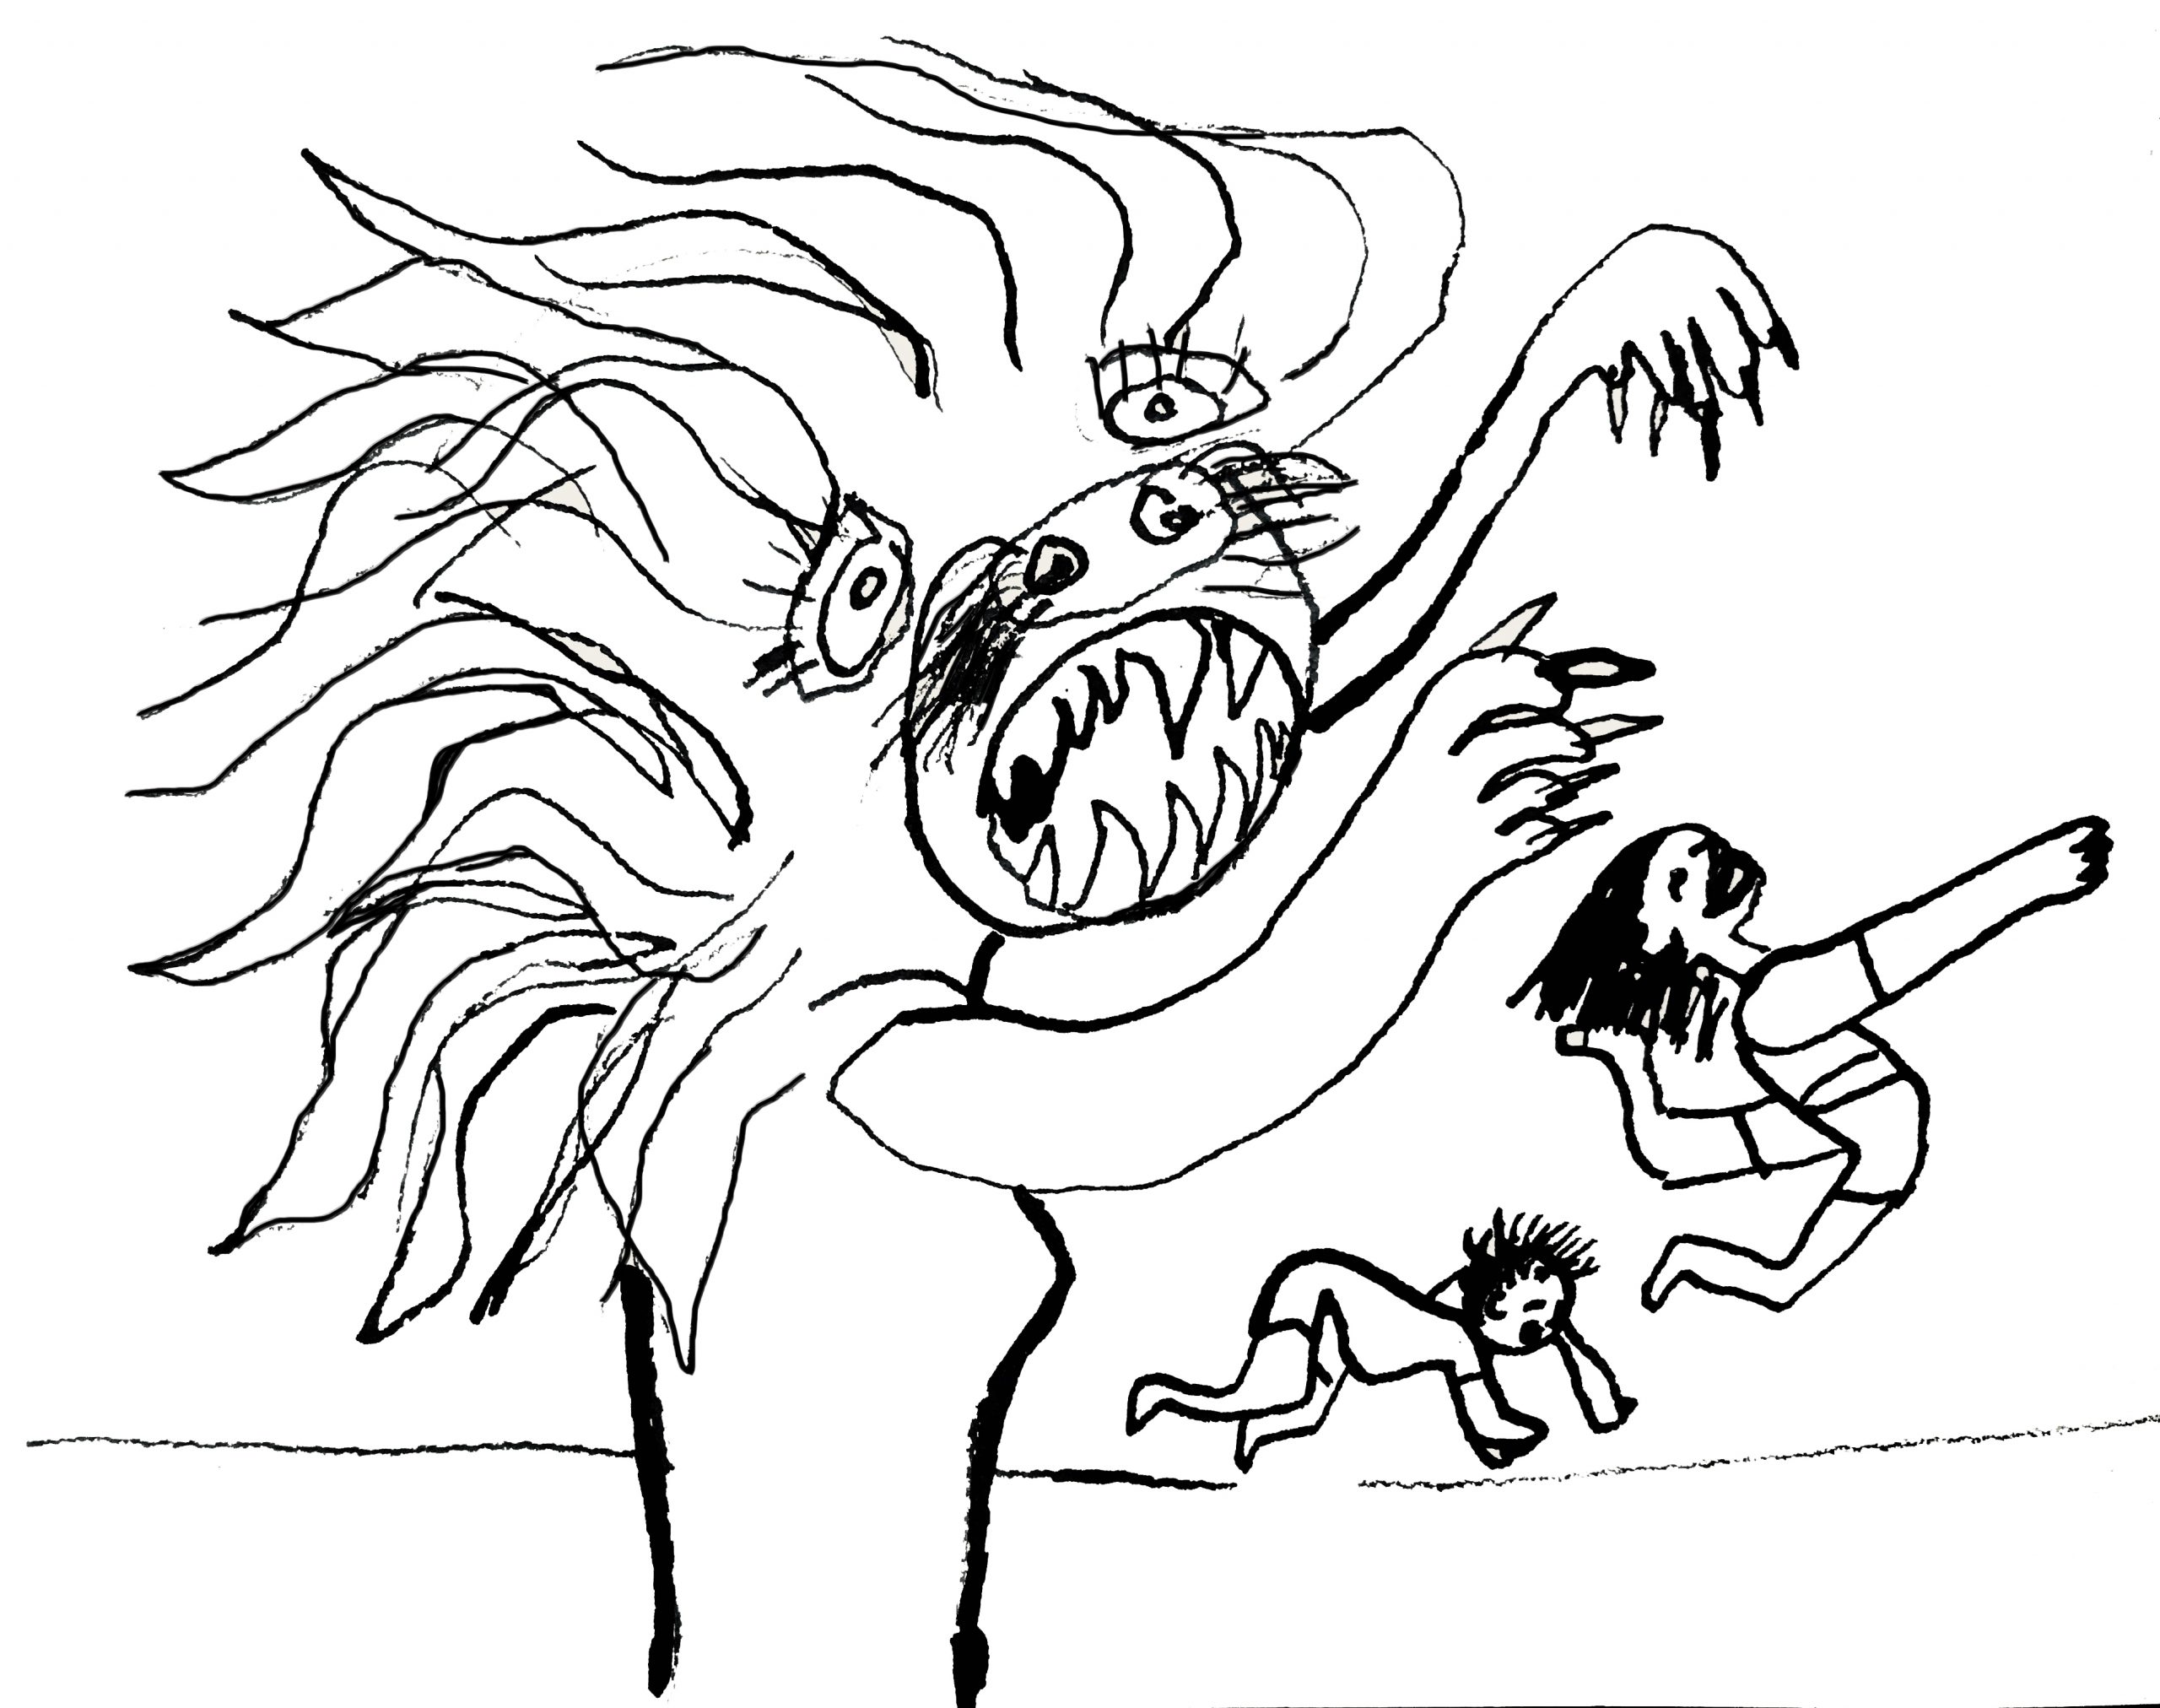 black ink drawing of person with beast/monster head arms in the air next to small drawings of two children